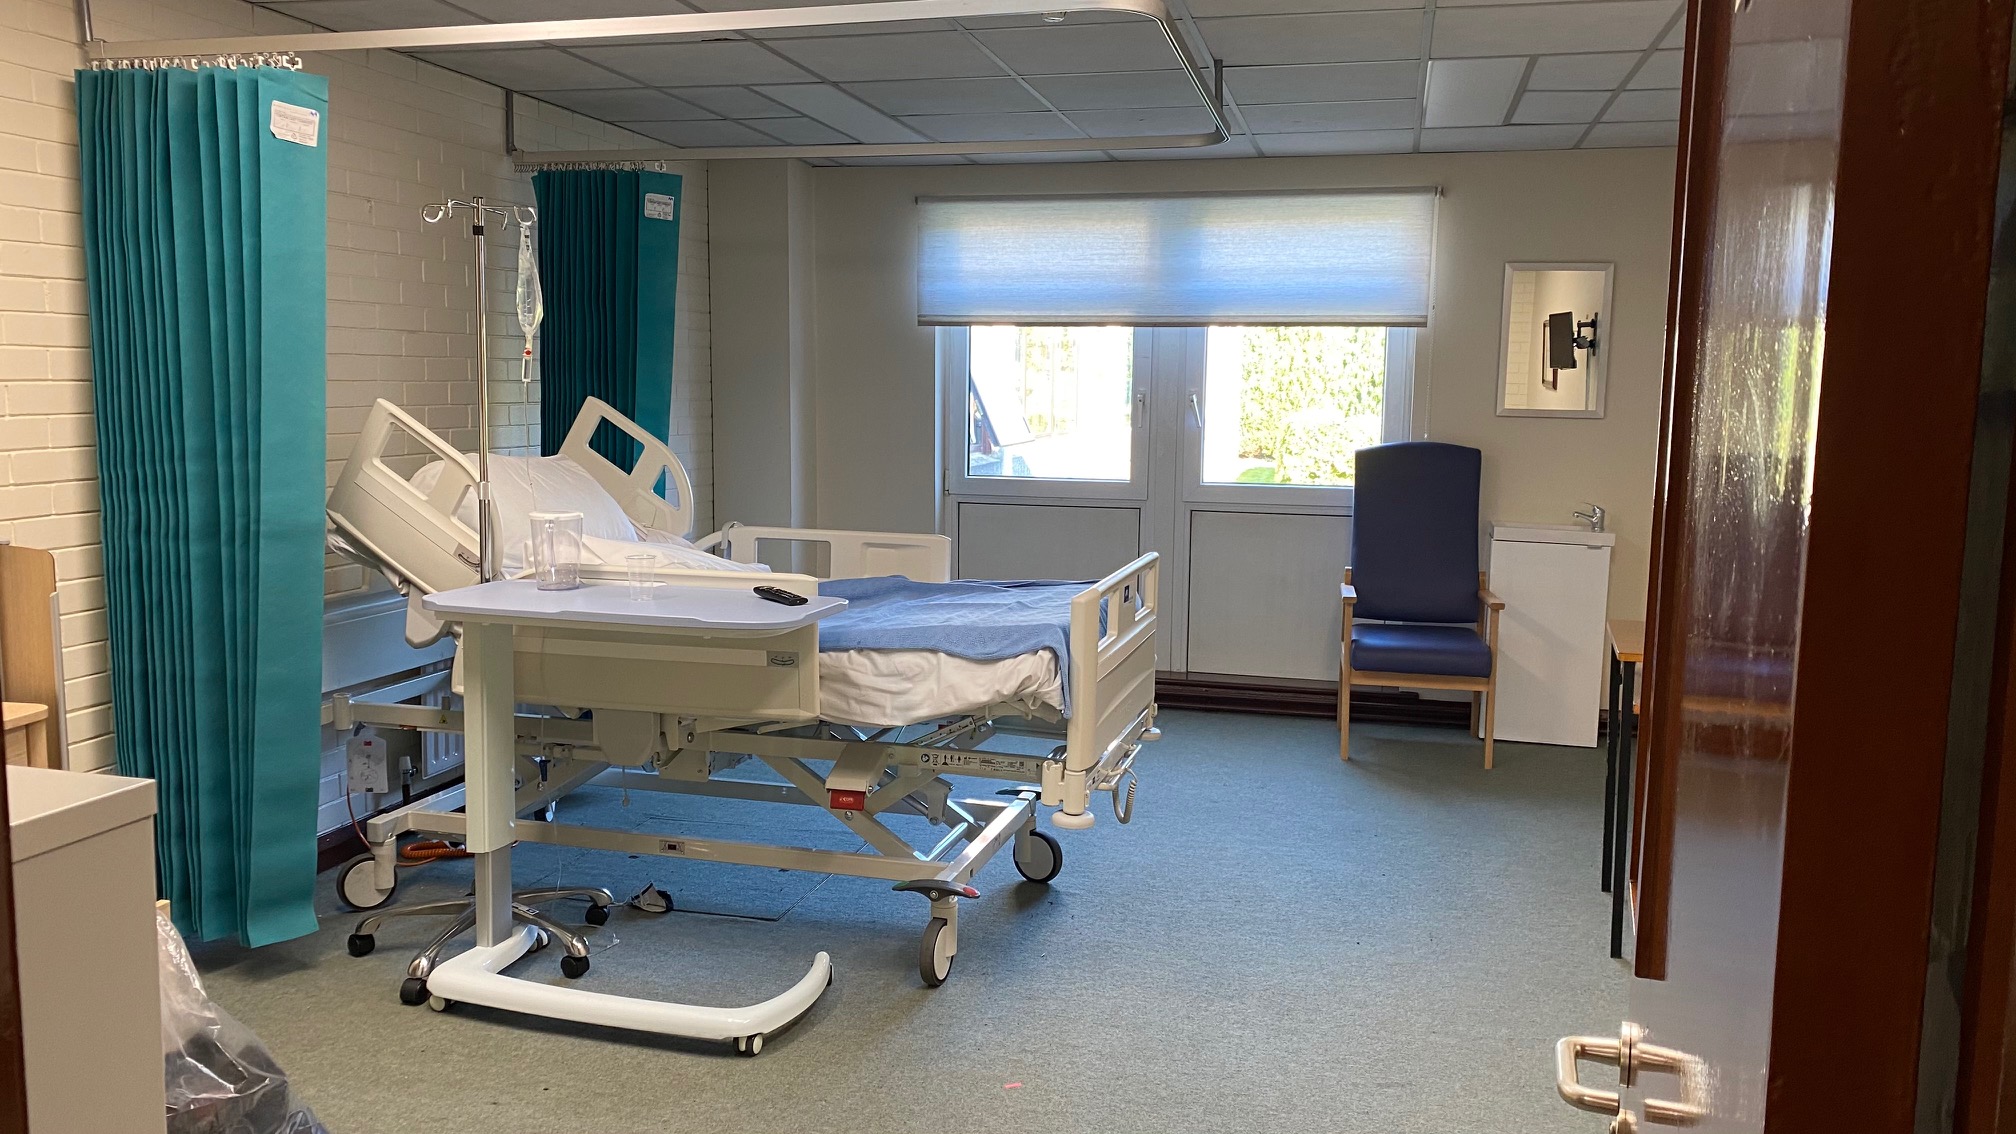 A small classroom became a hospital room over night.